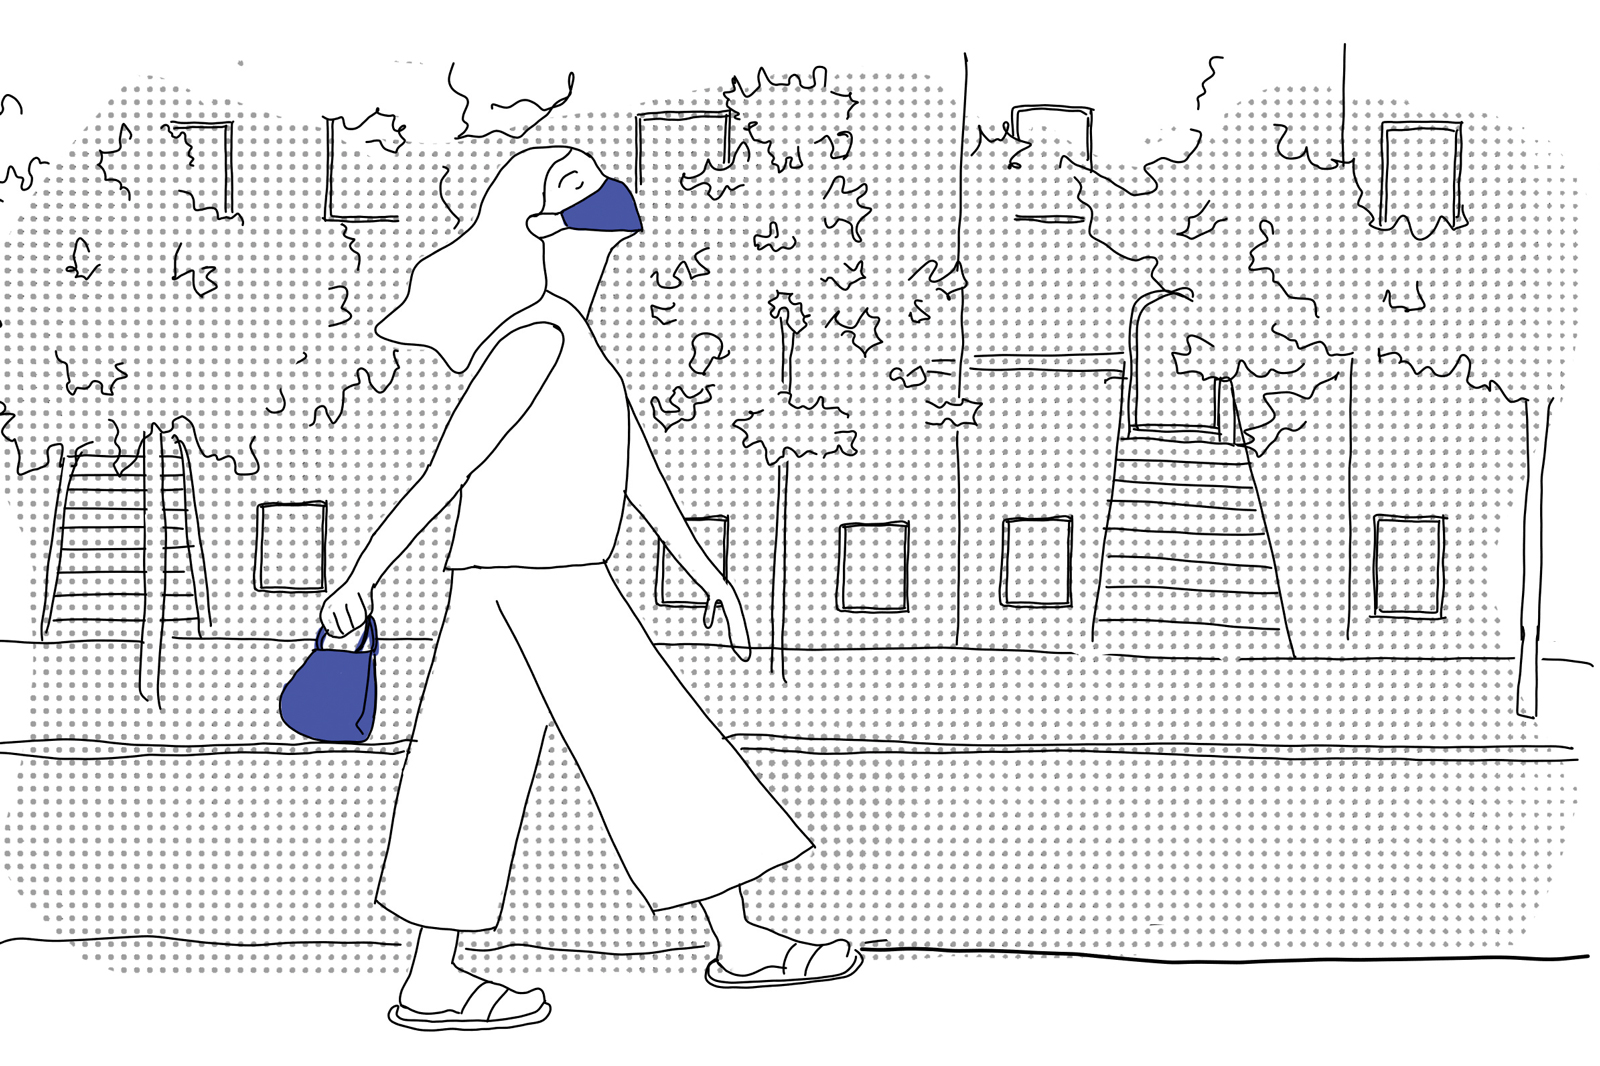 Illustration of woman walking leisurely through city streets in springtime